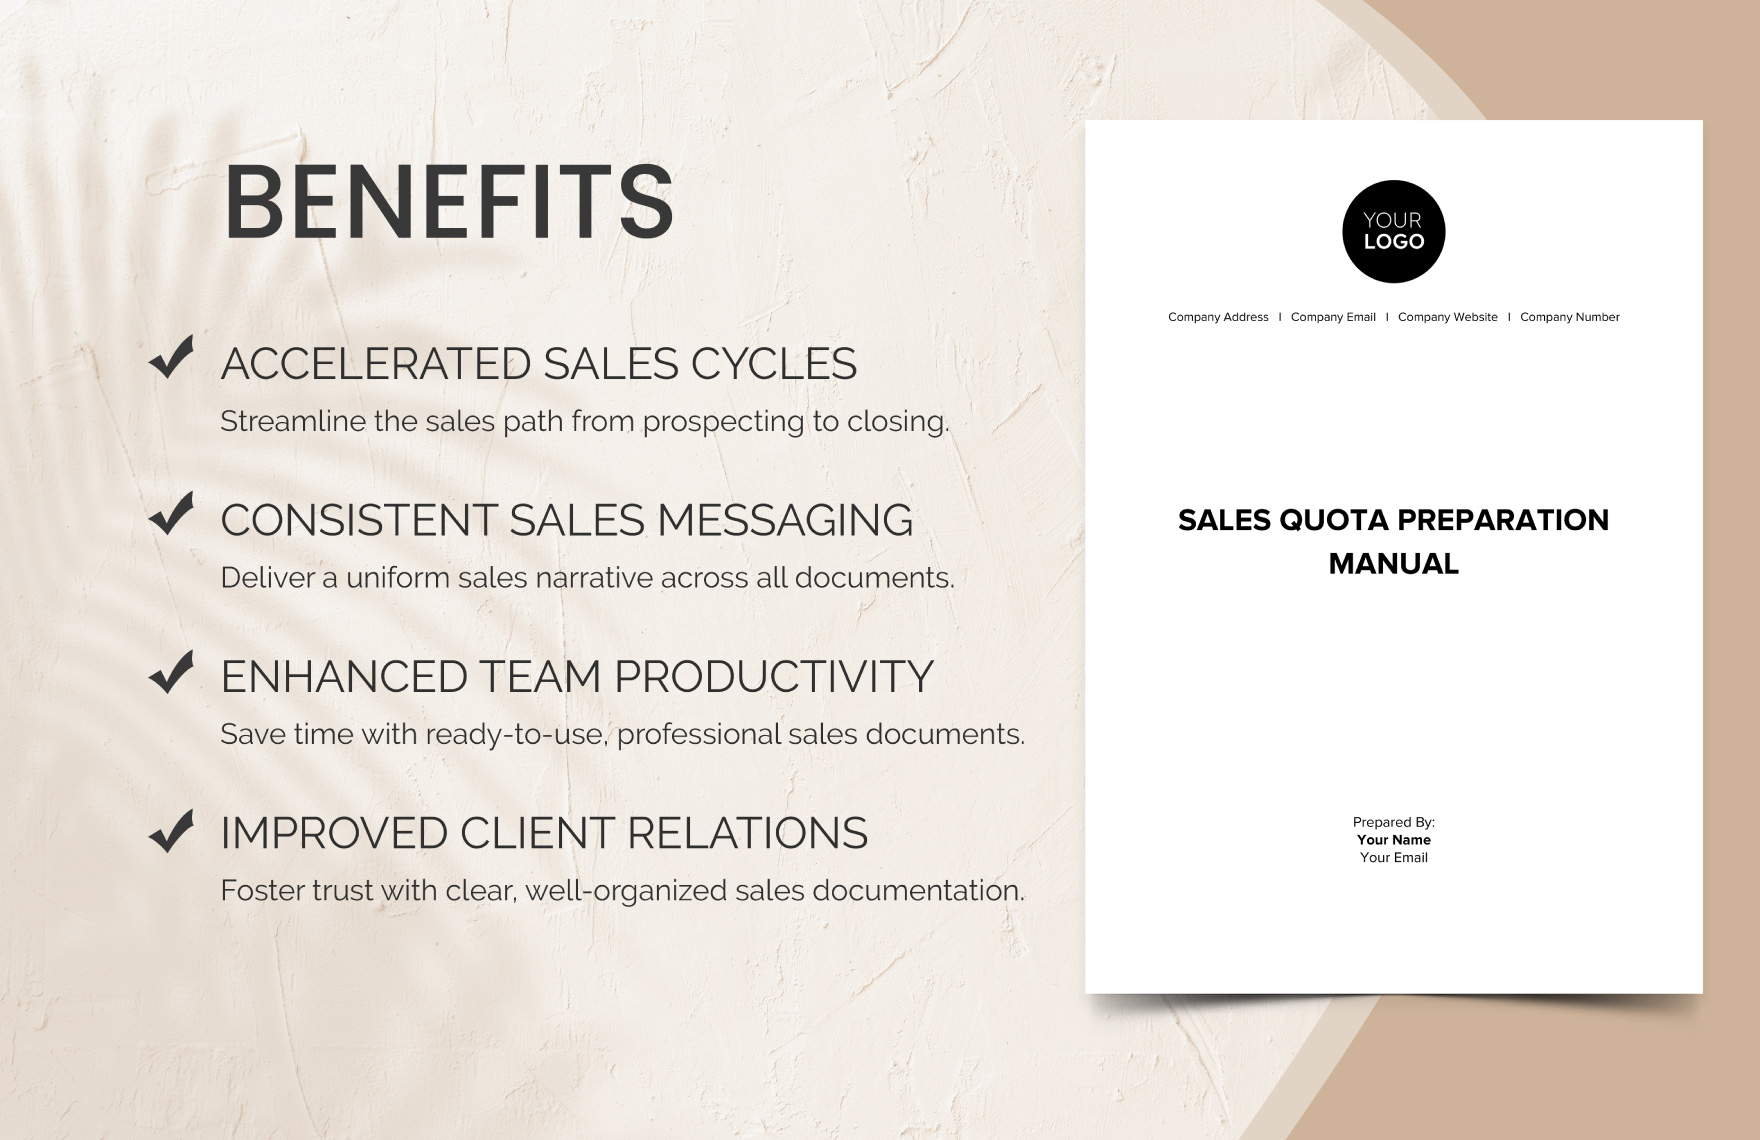 Sales Quote Preparation Manual Template